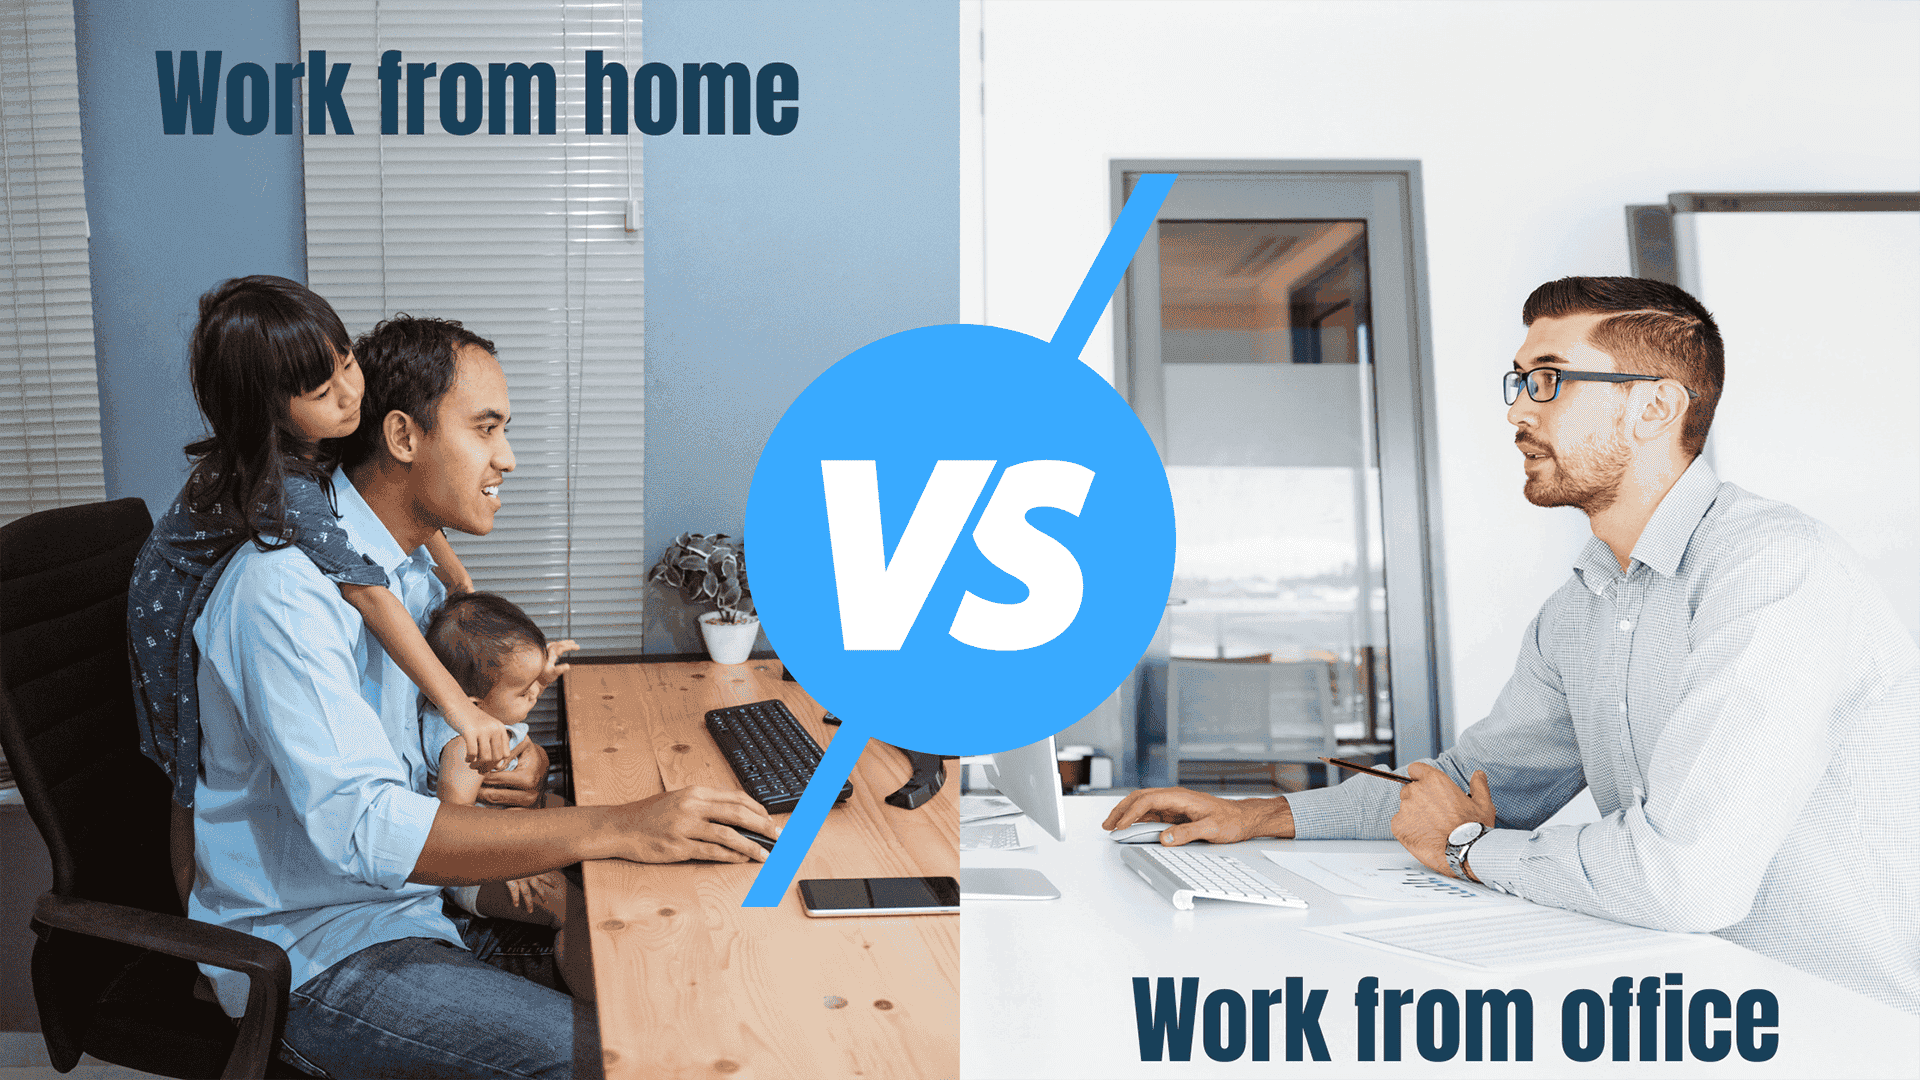 presentation on work from home vs office